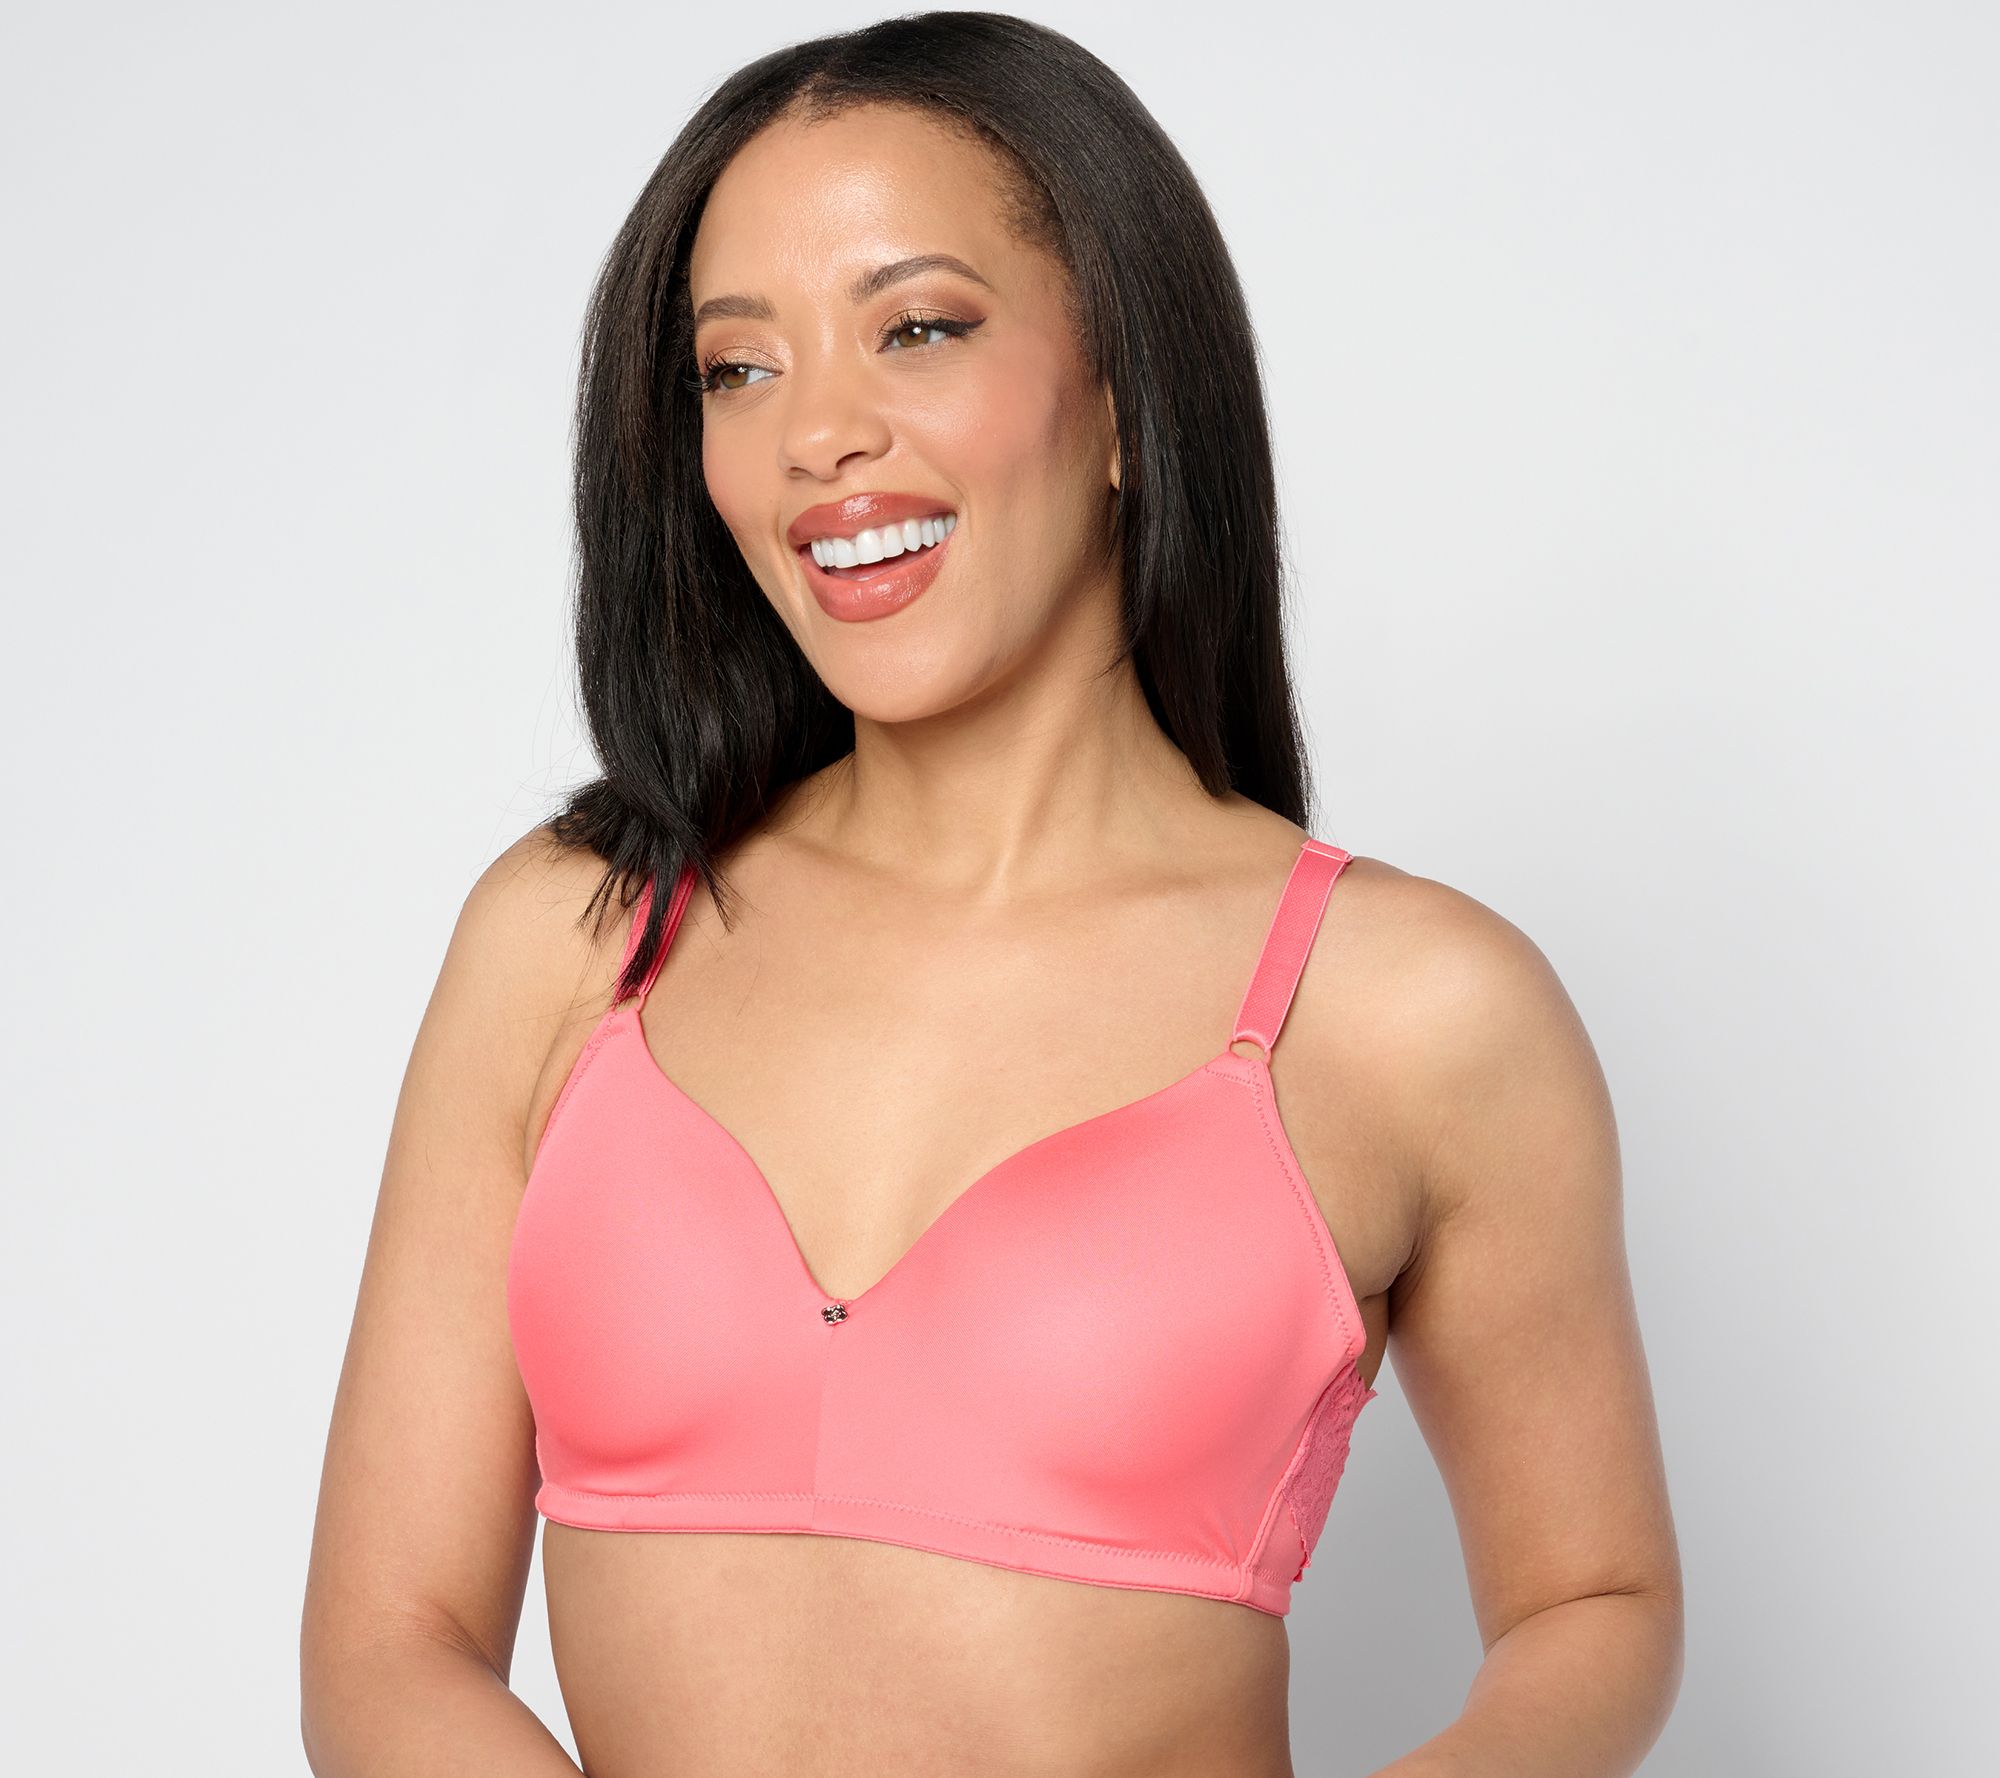 Barely Breezies Floral Lace Bra in Peach - QVC UK